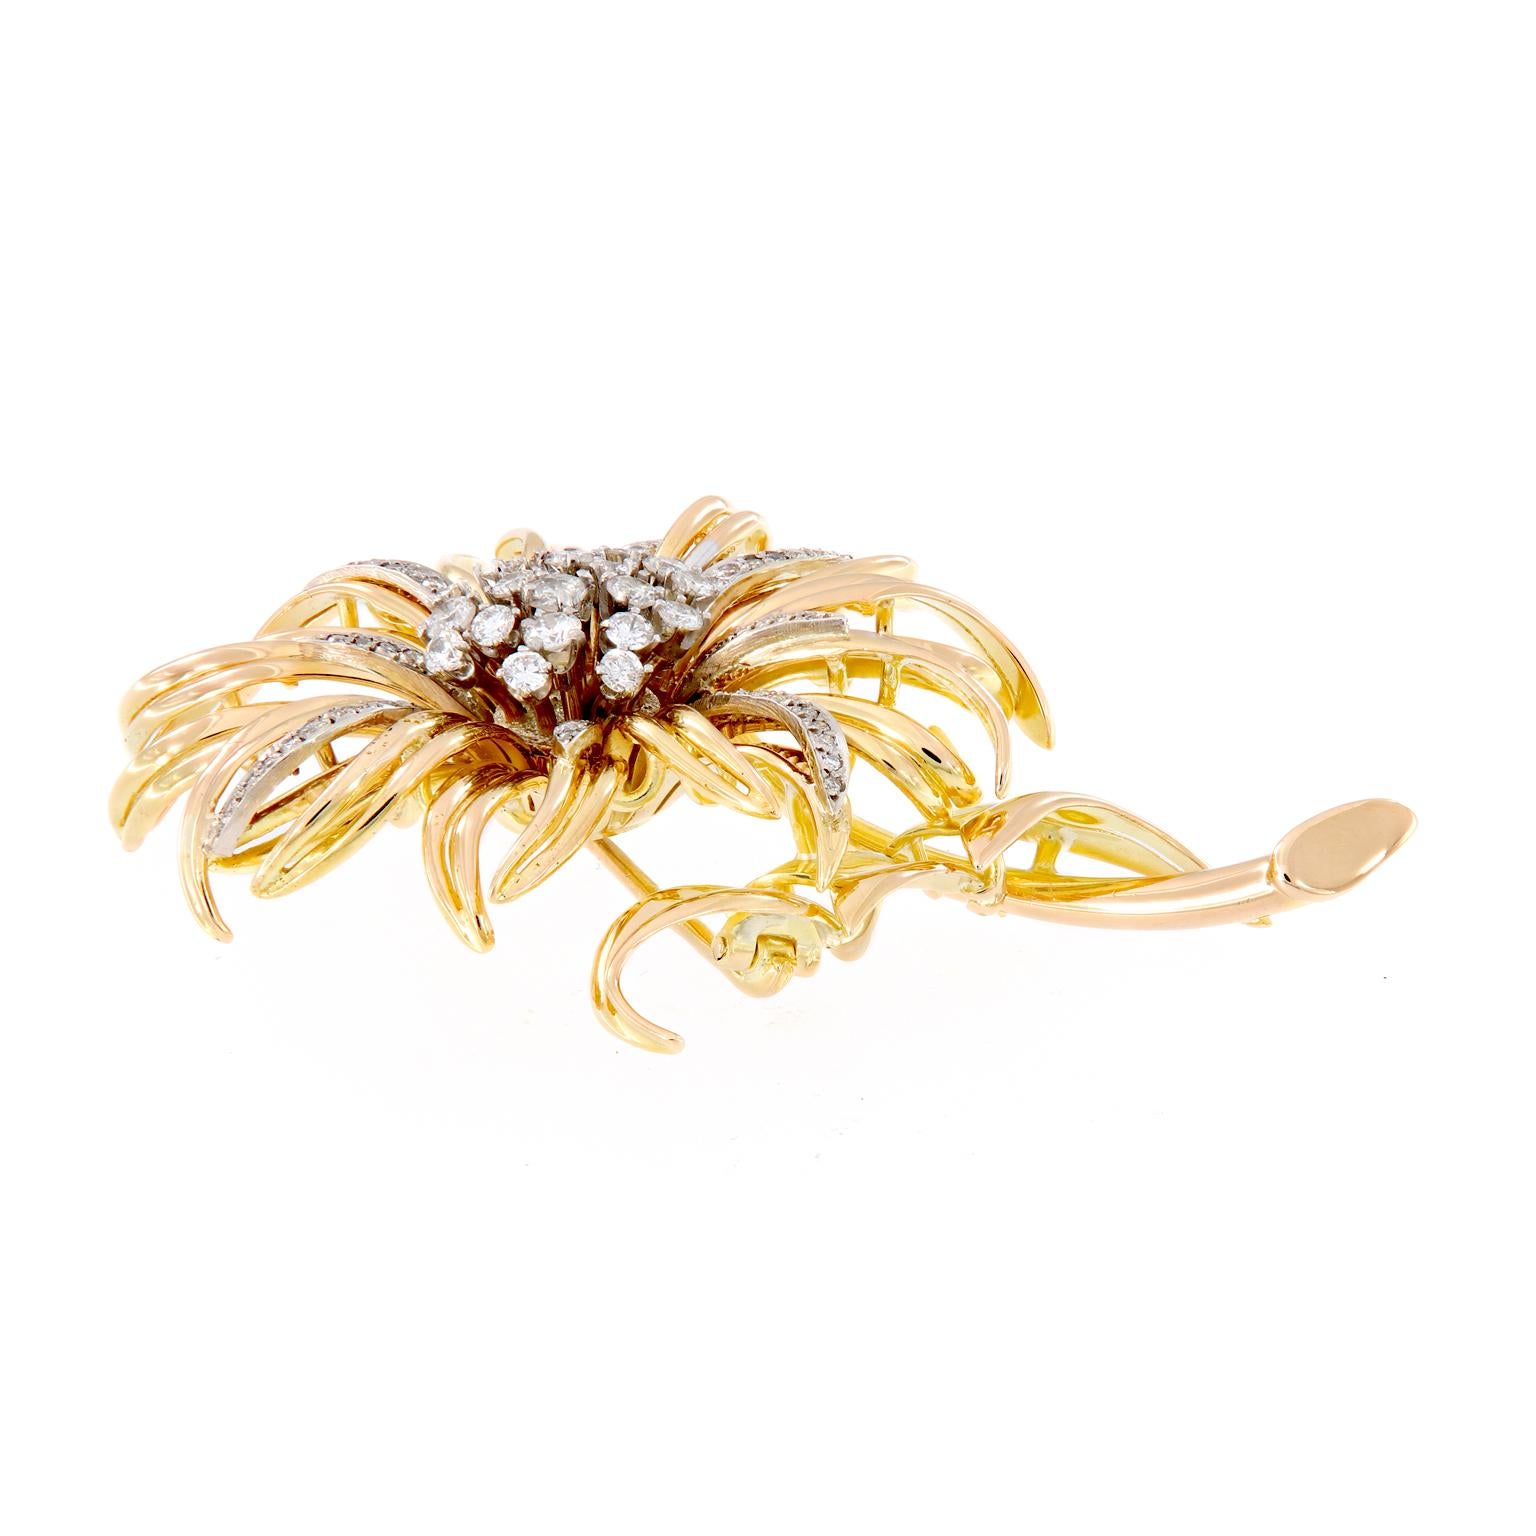 Pretty Intricate sunflower design crafted in 18k yellow gold accented with almost two carats of single and full-cut diamonds. This estate brooch is in like-new condidtion. Weigh 26.8 grams

Diamonds 1.85 cttw, SI-I1, GH